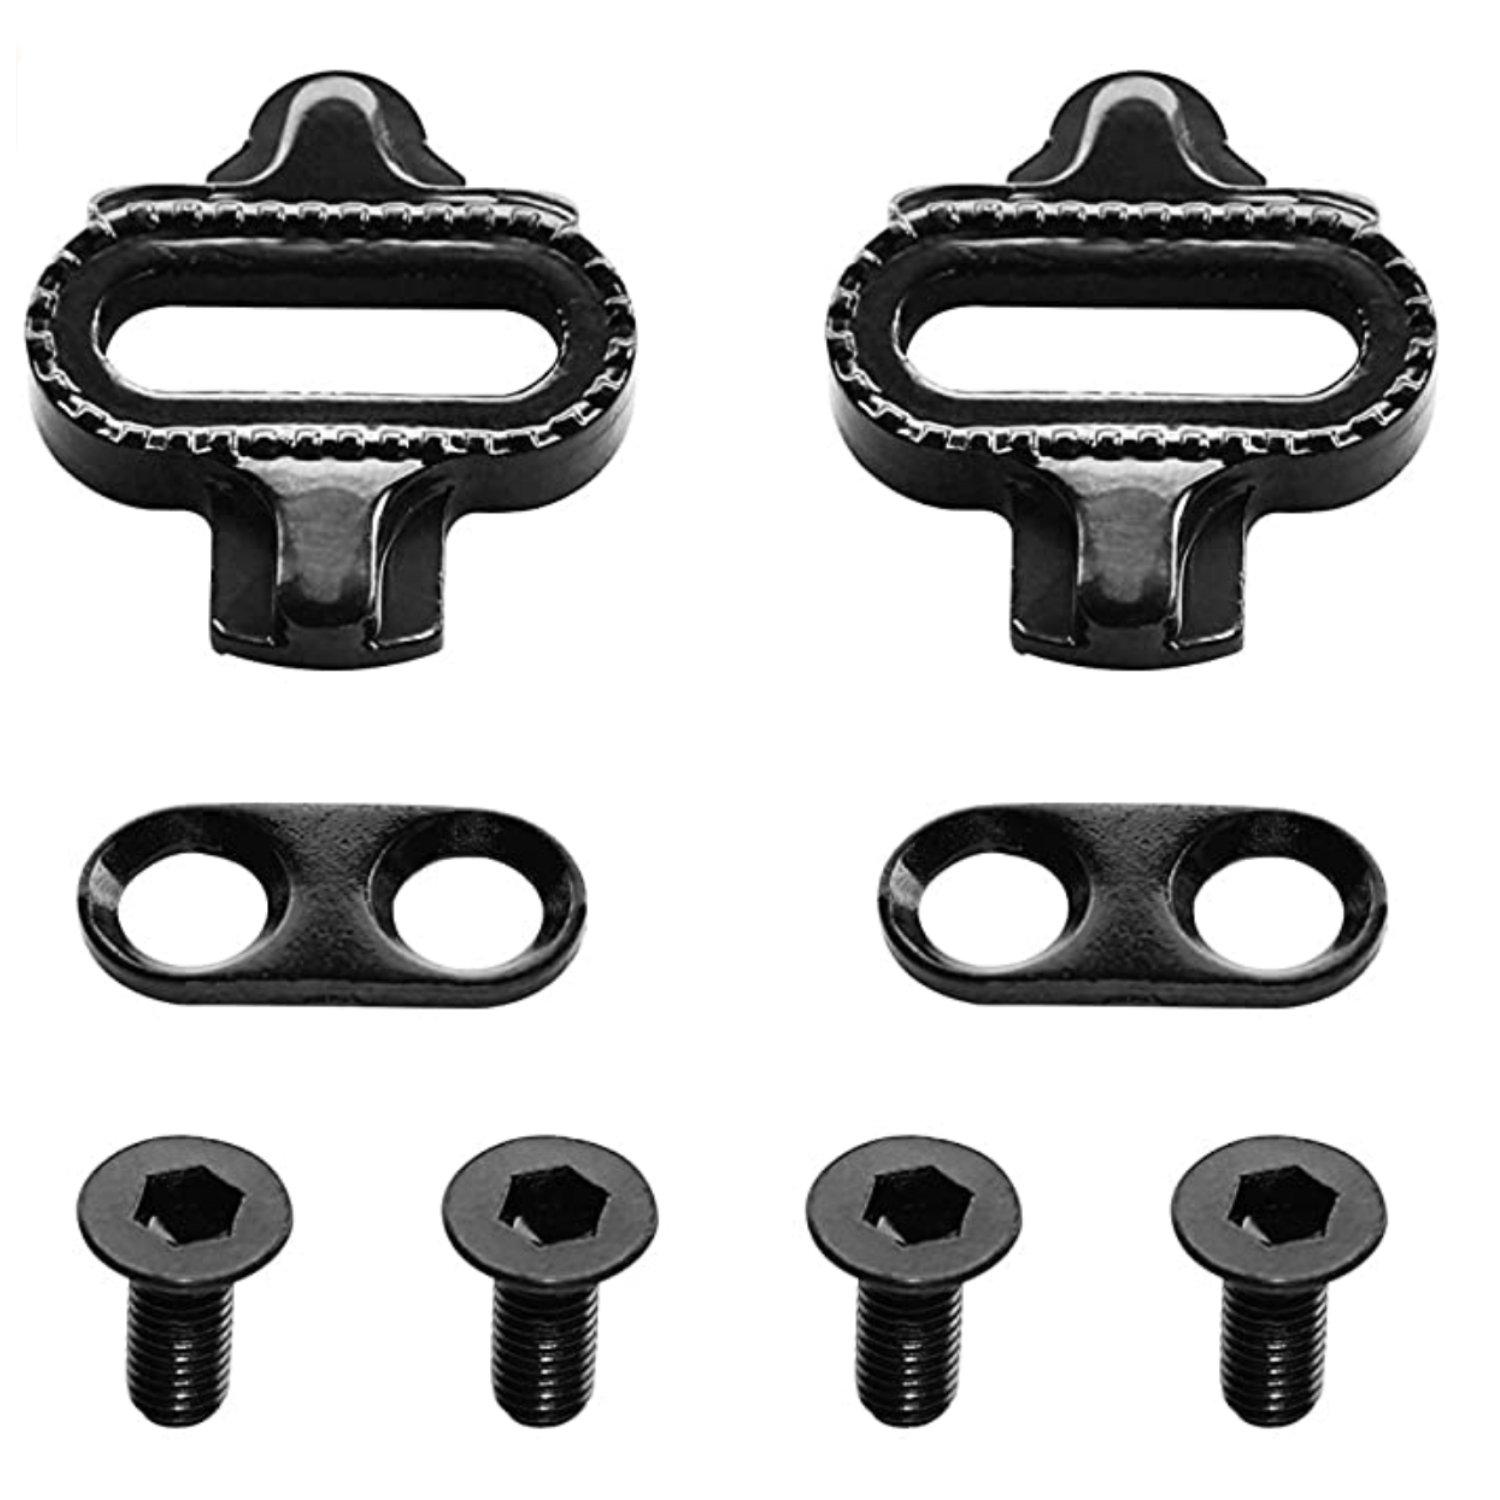 spd pedals and cleats